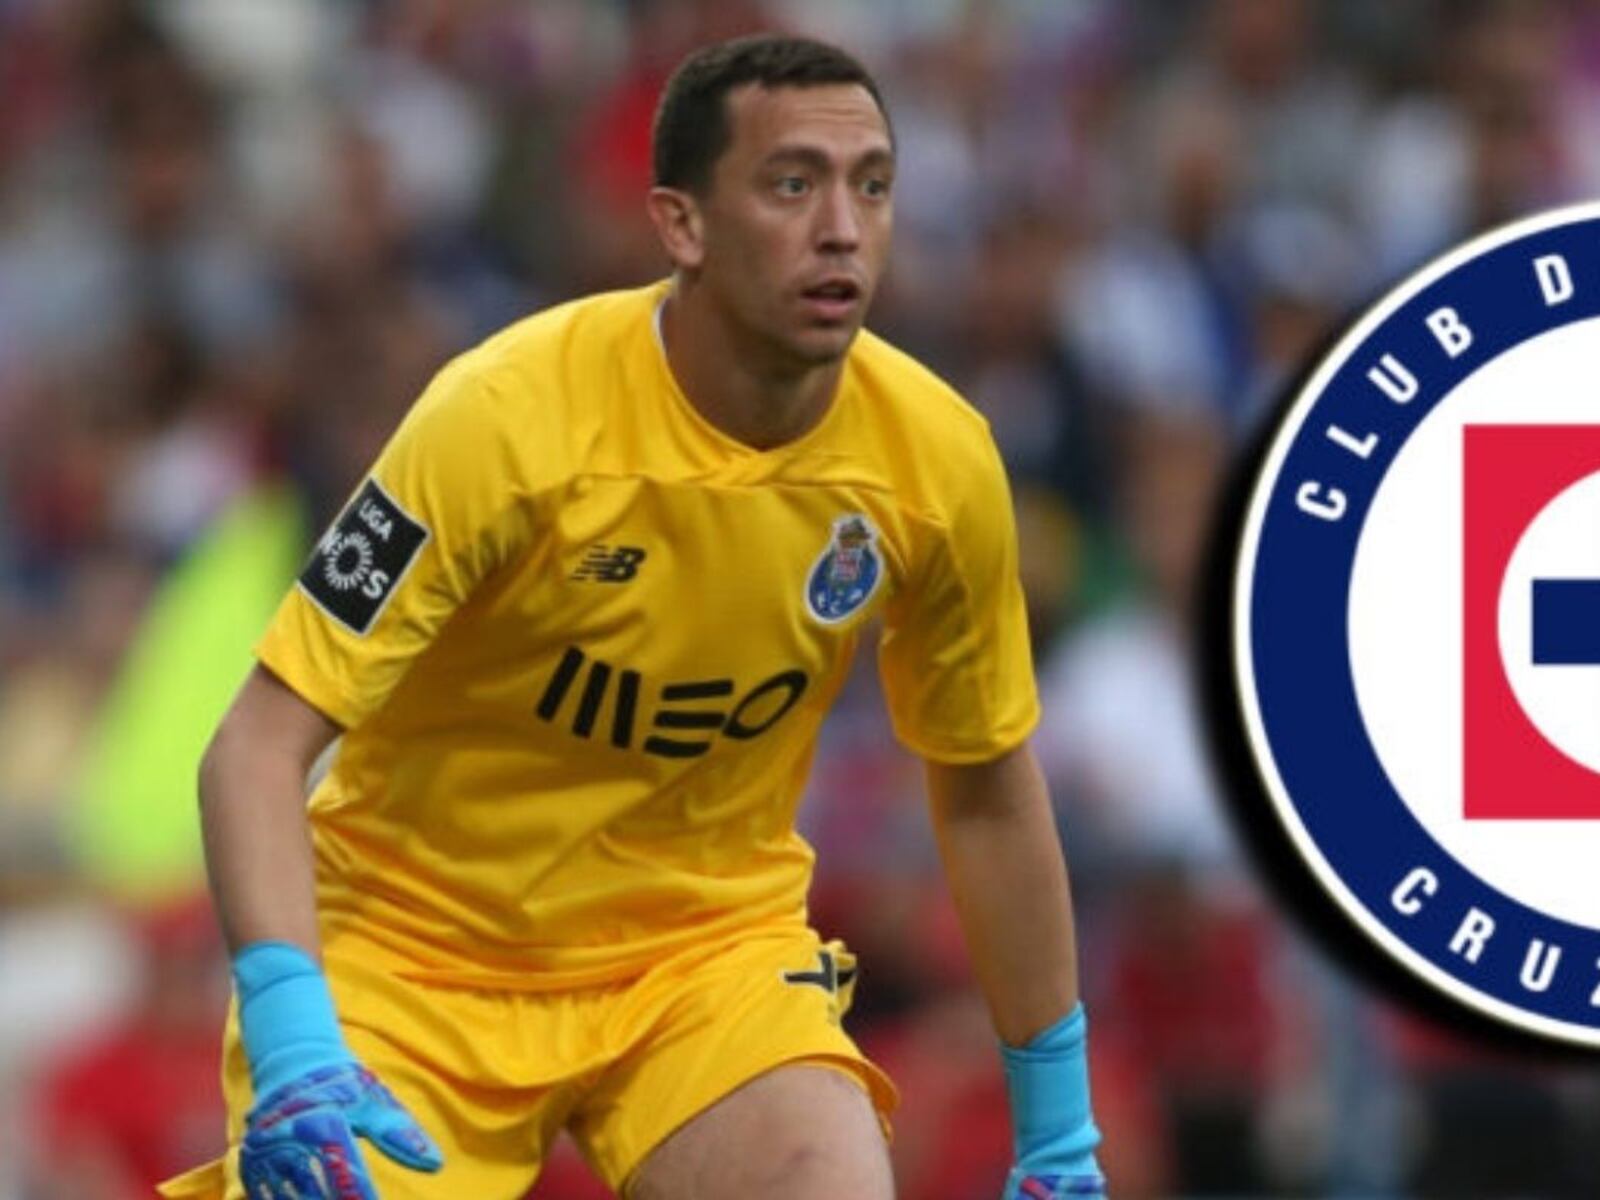 The reason why Marchesín wants to betray America and sign with Cruz Azul